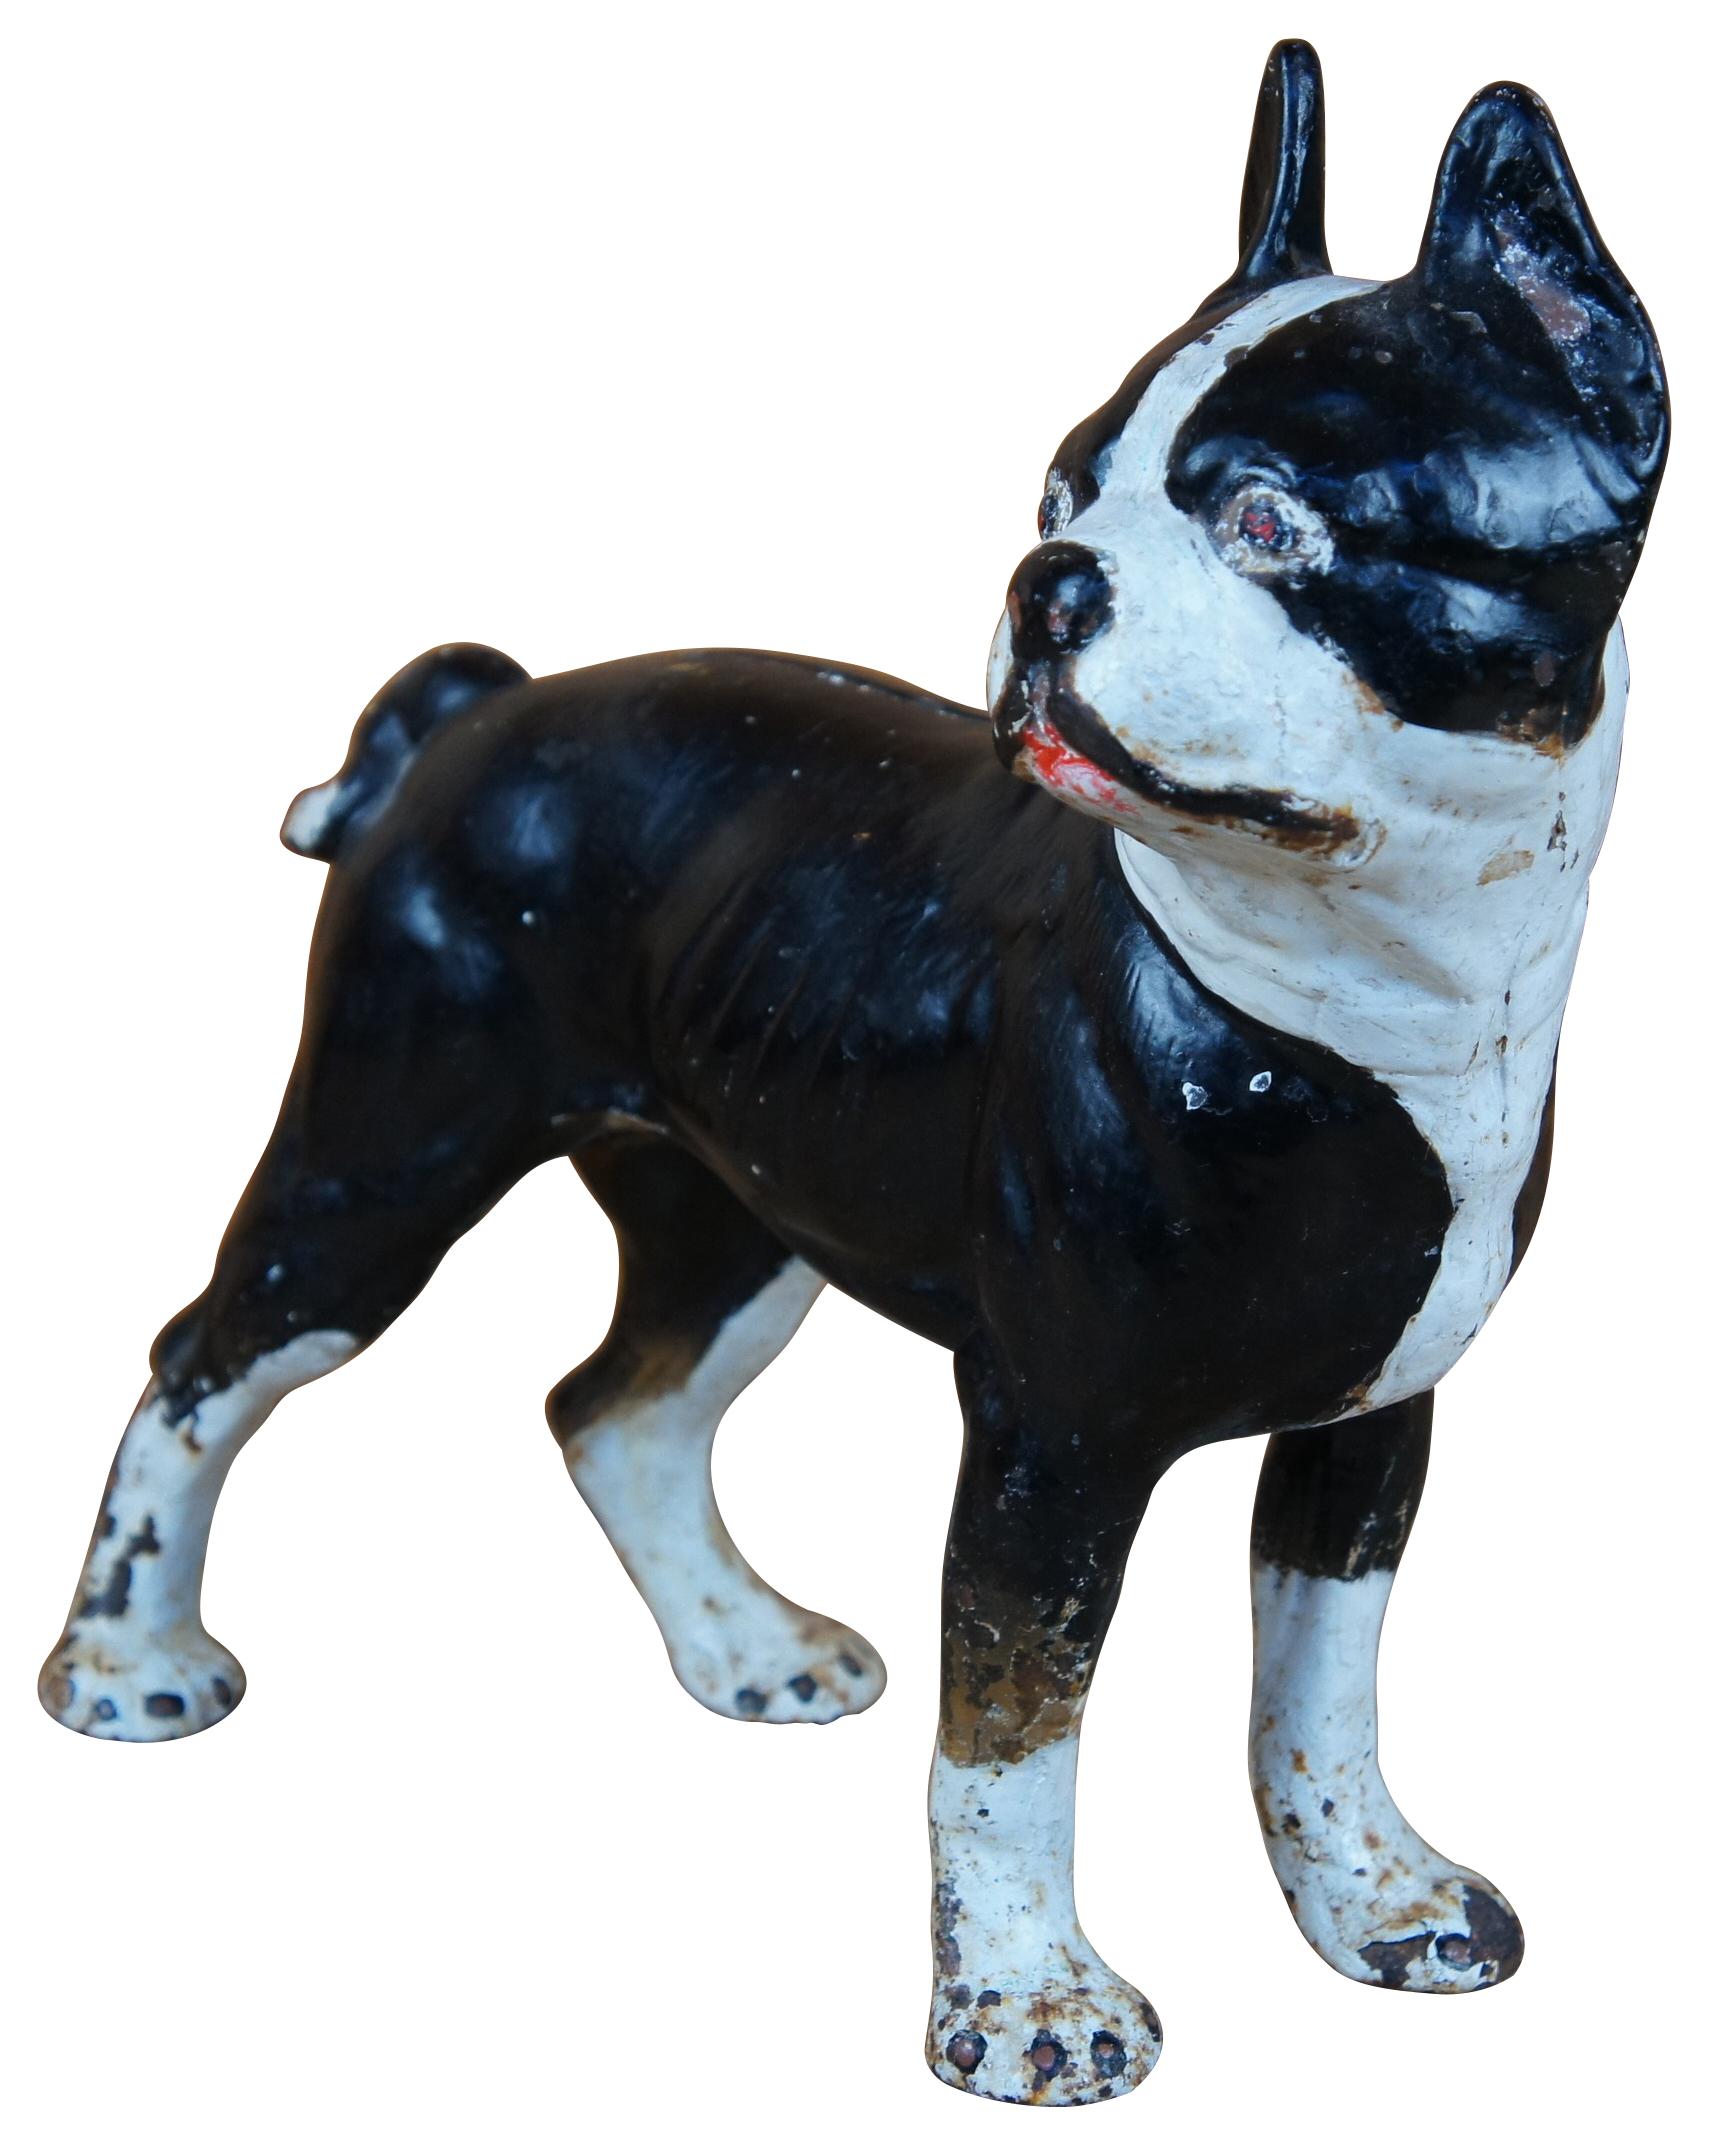 Cast iron dog made of to adjoining pieces possibly made by Hubley, good for use as a door stop or bookend. Size:10